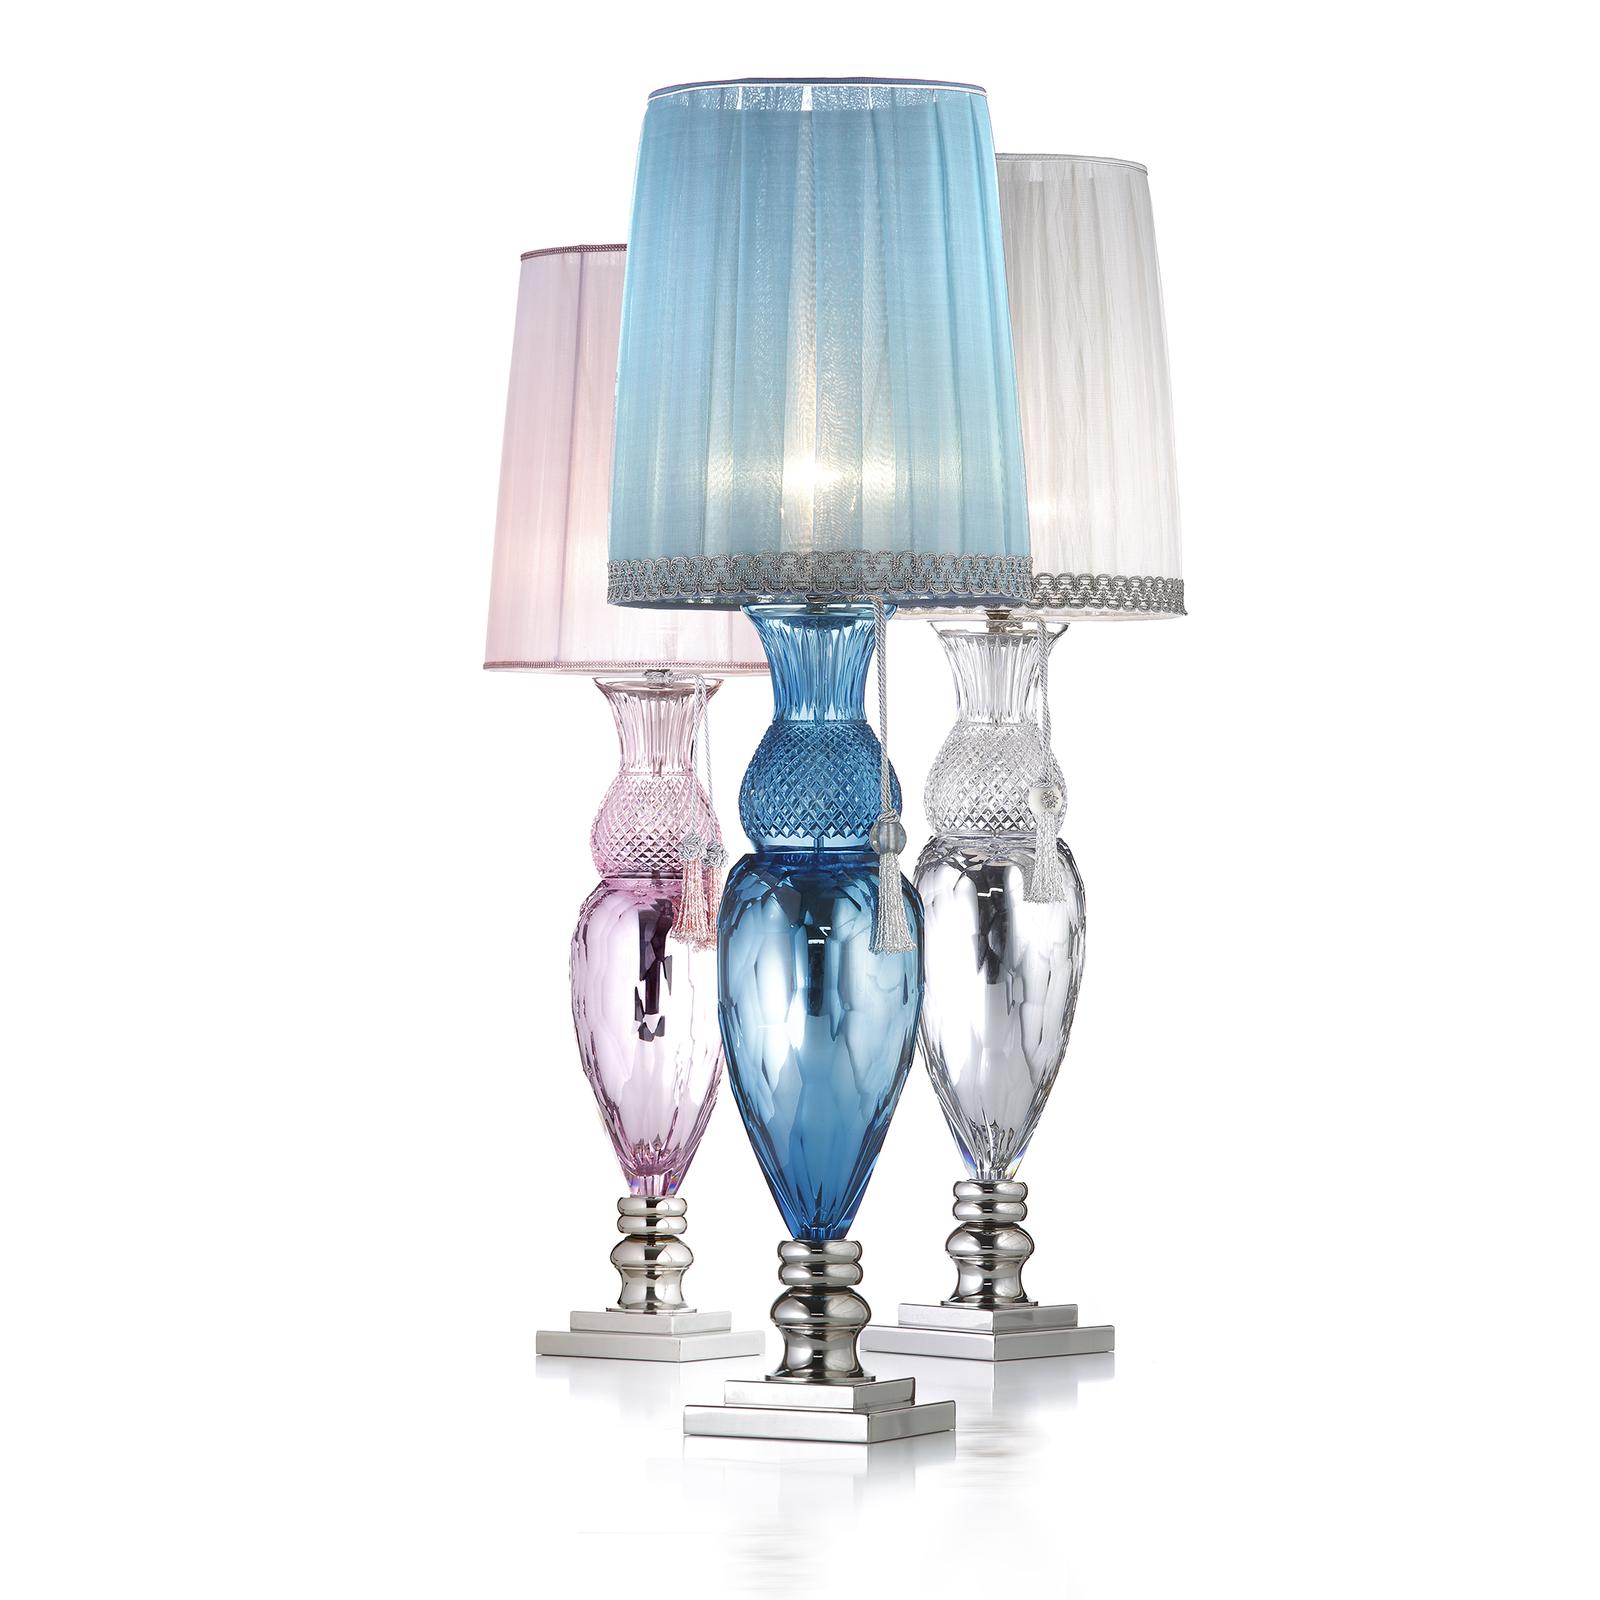 A vivid pop of color and a stunning silhouette, combined with the use of exquisite materials, make this table lamp a superb addition to a luxurious interior. Either on a nightstand, entryway console or desk in the study, this piece will make a